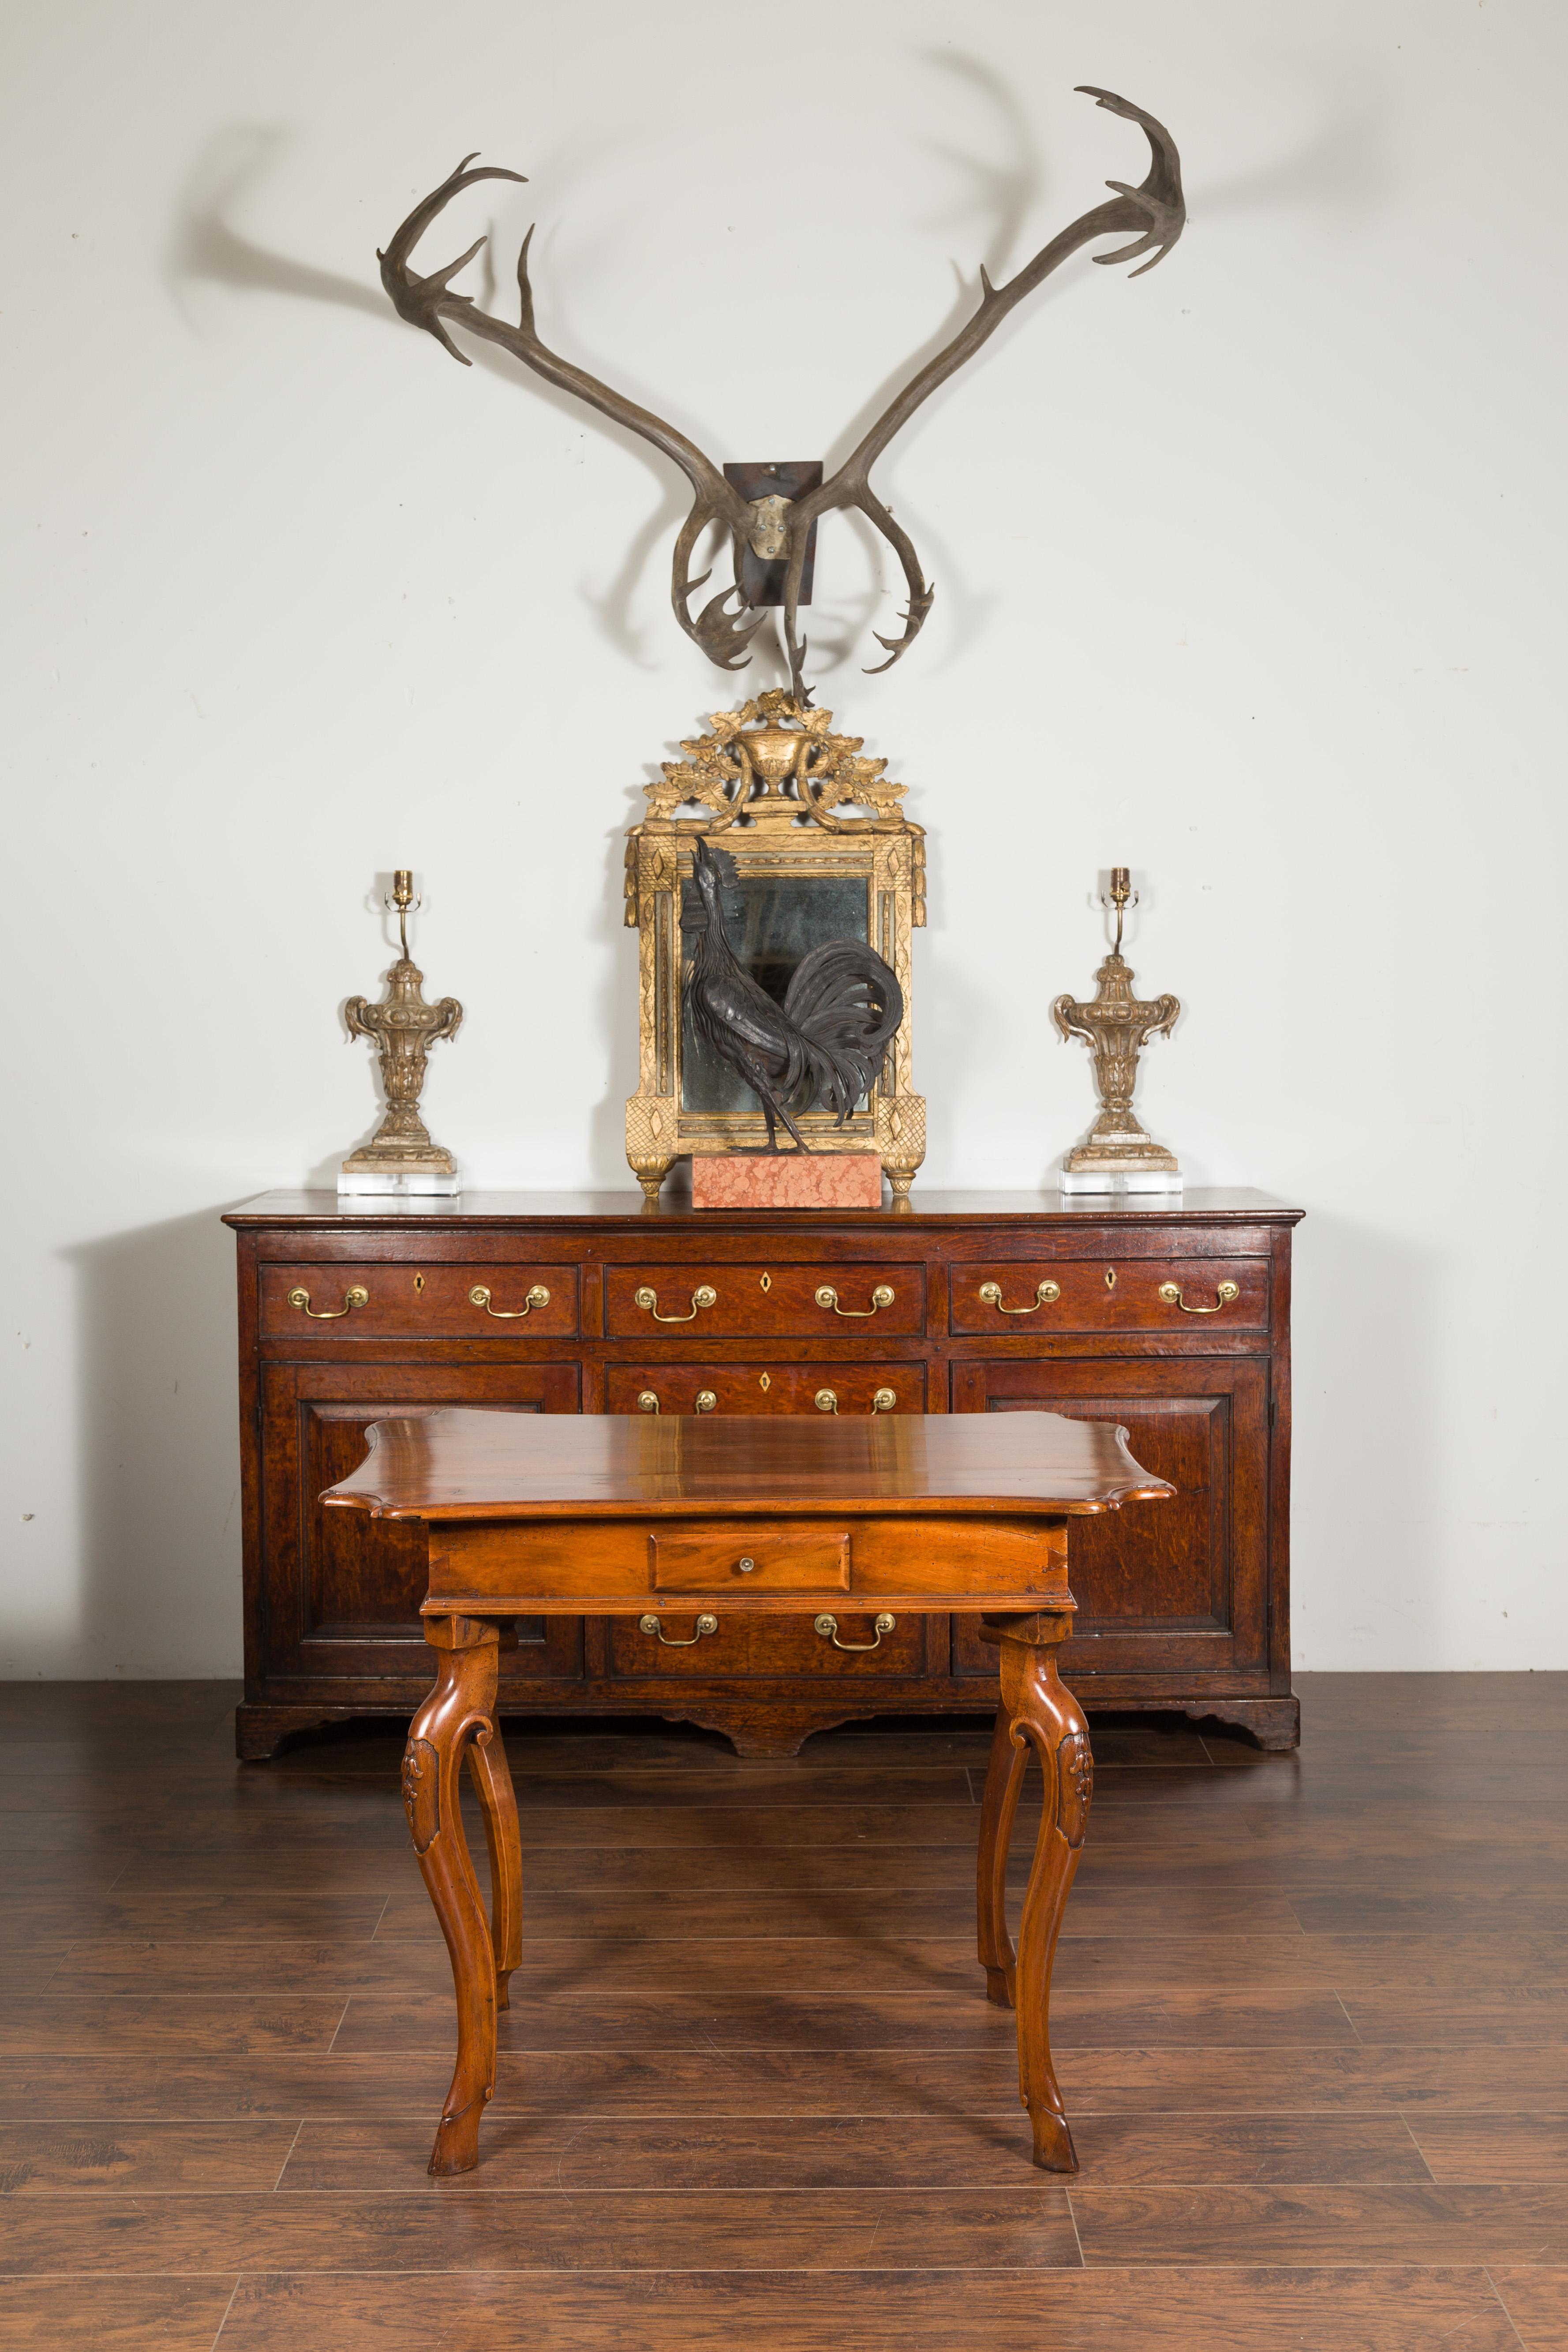 Carved Northern Italian 1720s Régence Walnut Side Table with Four Drawers and Cabrioles